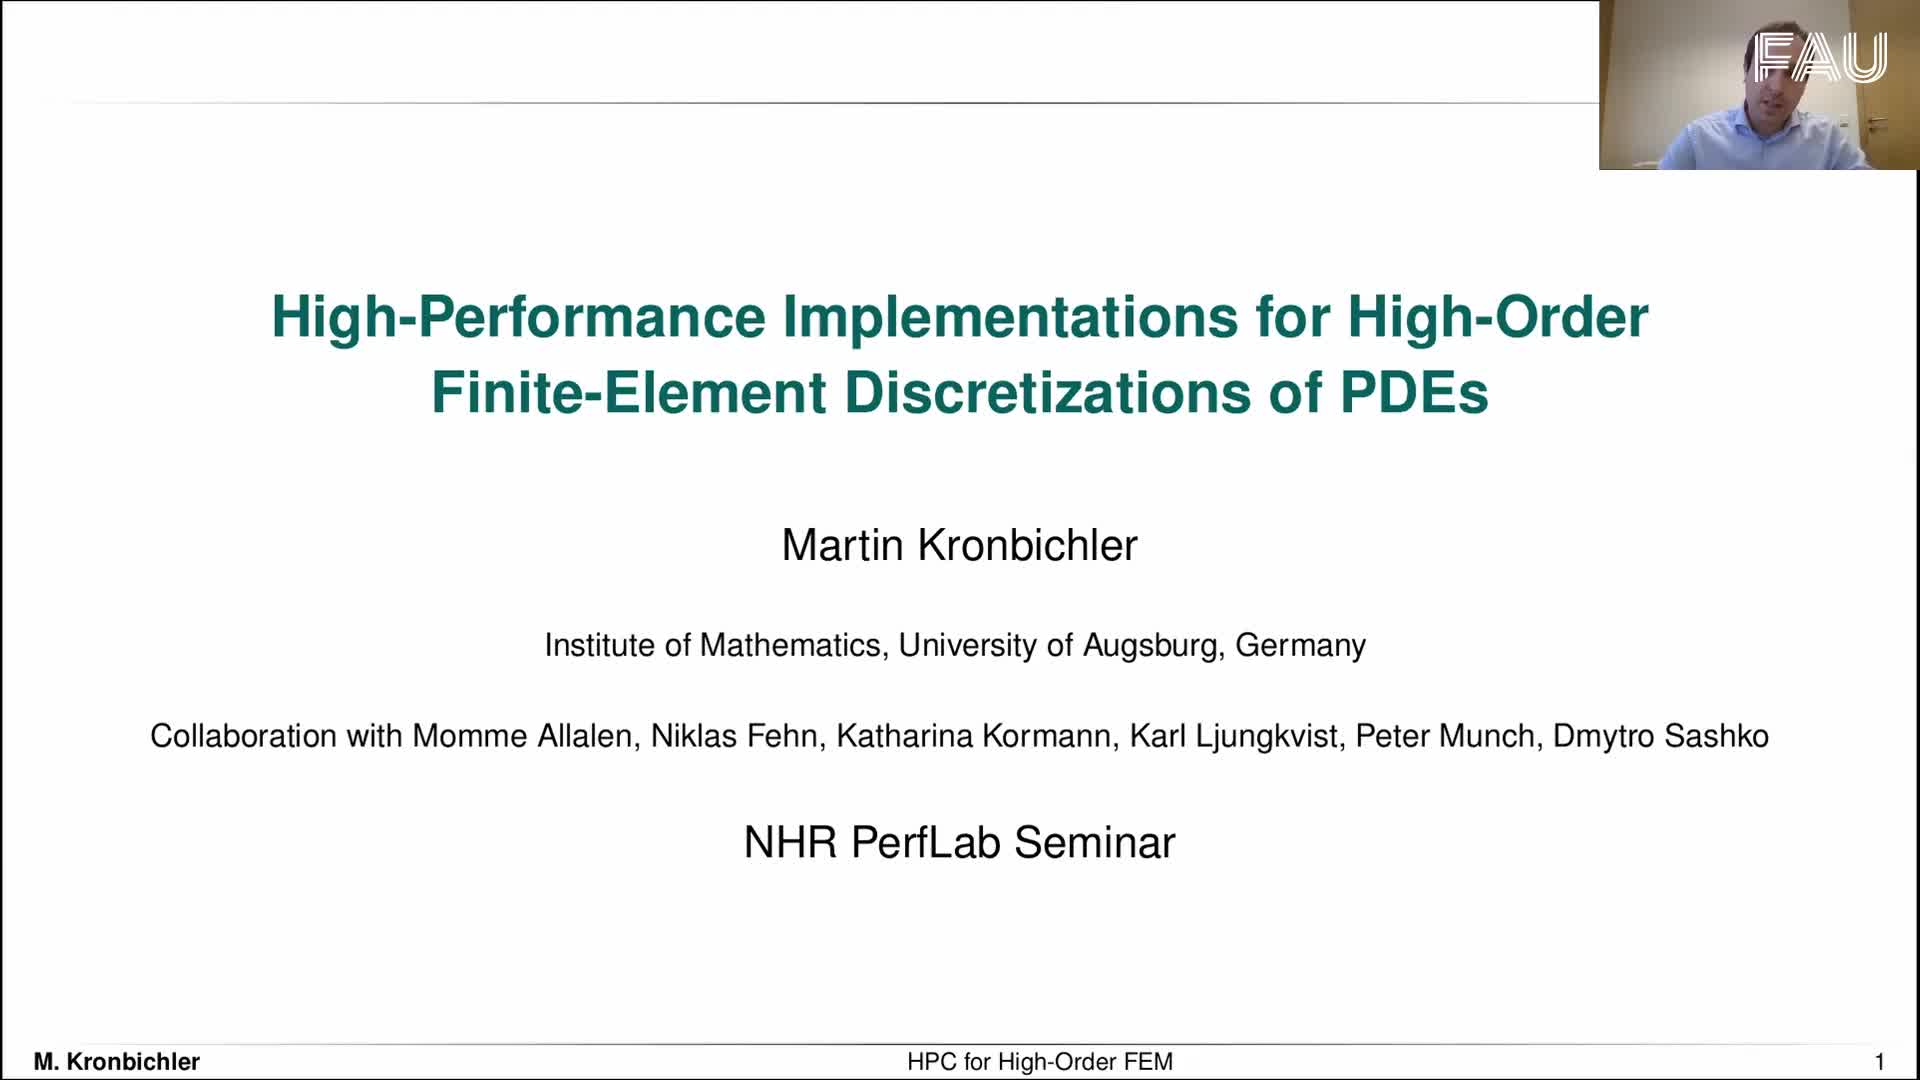 NHR PerfLab Seminar: High-Performance Implementations for High-Order Finite-Element Discretizations of PDEs preview image